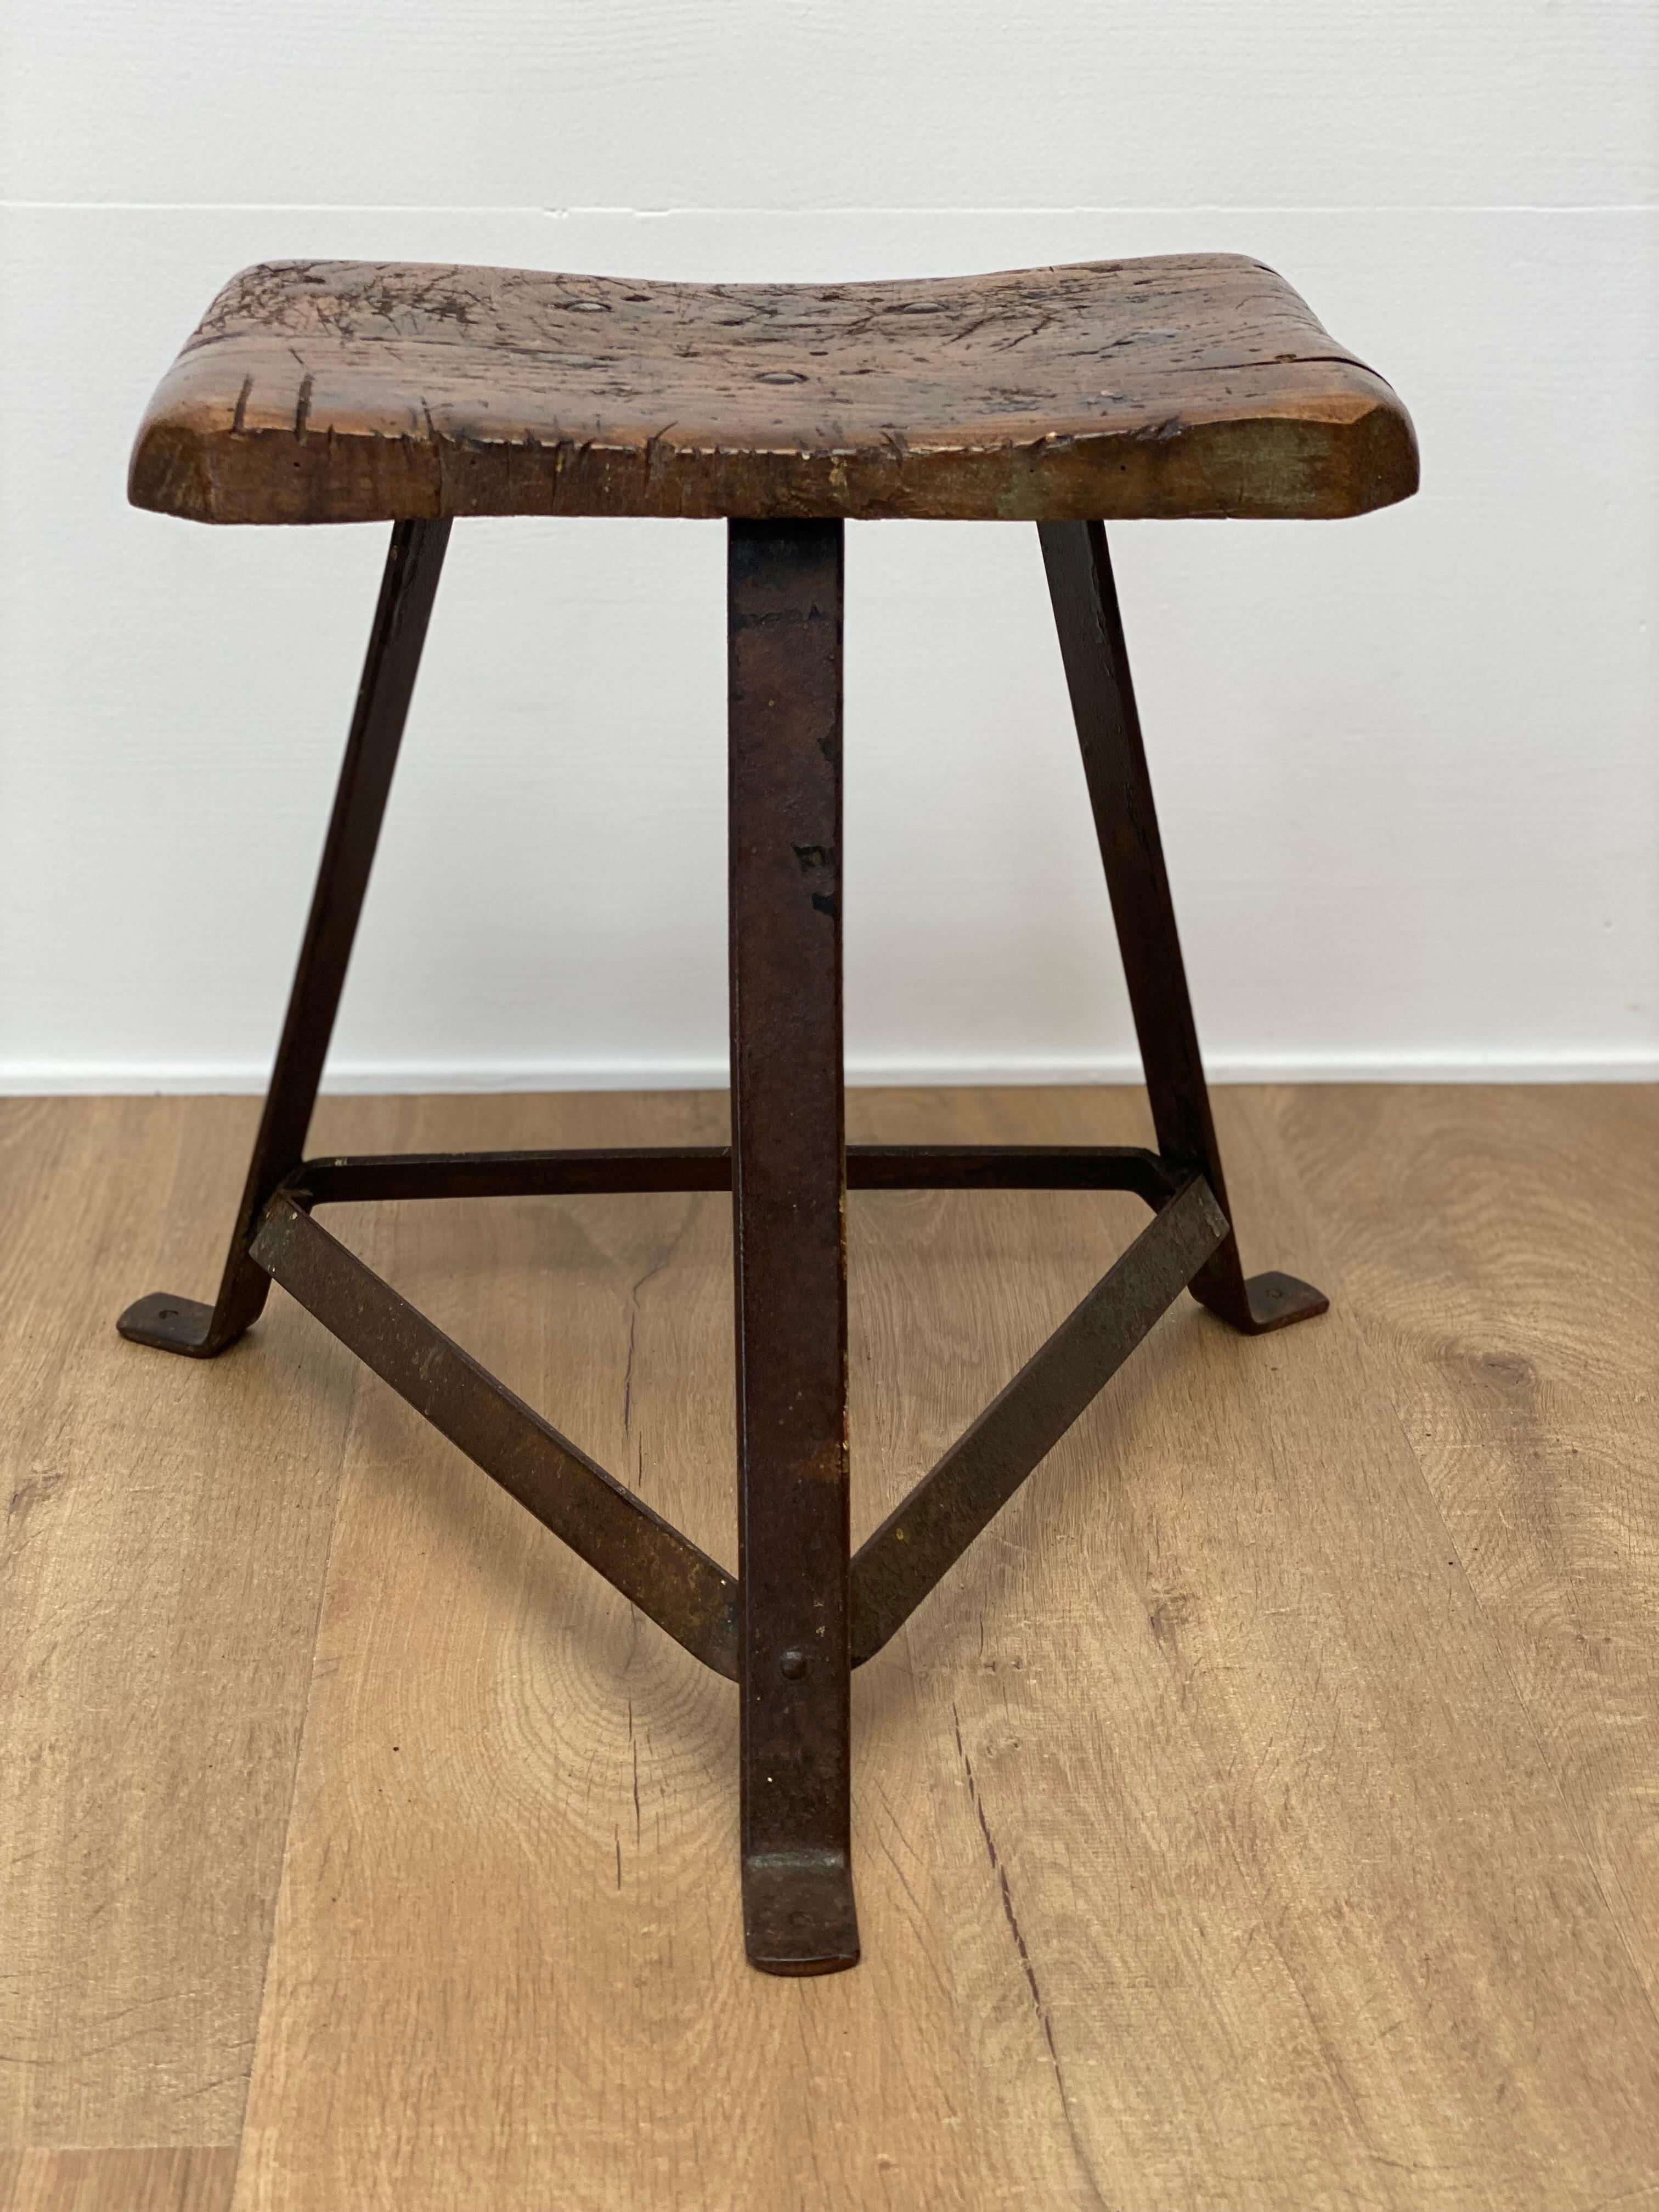 Powerful Industrial , Brutalist small Table/Stool,
beautiful patinated Elm Top on a Cast Iron patinated base,
can be used for different purposes,
very decorative object